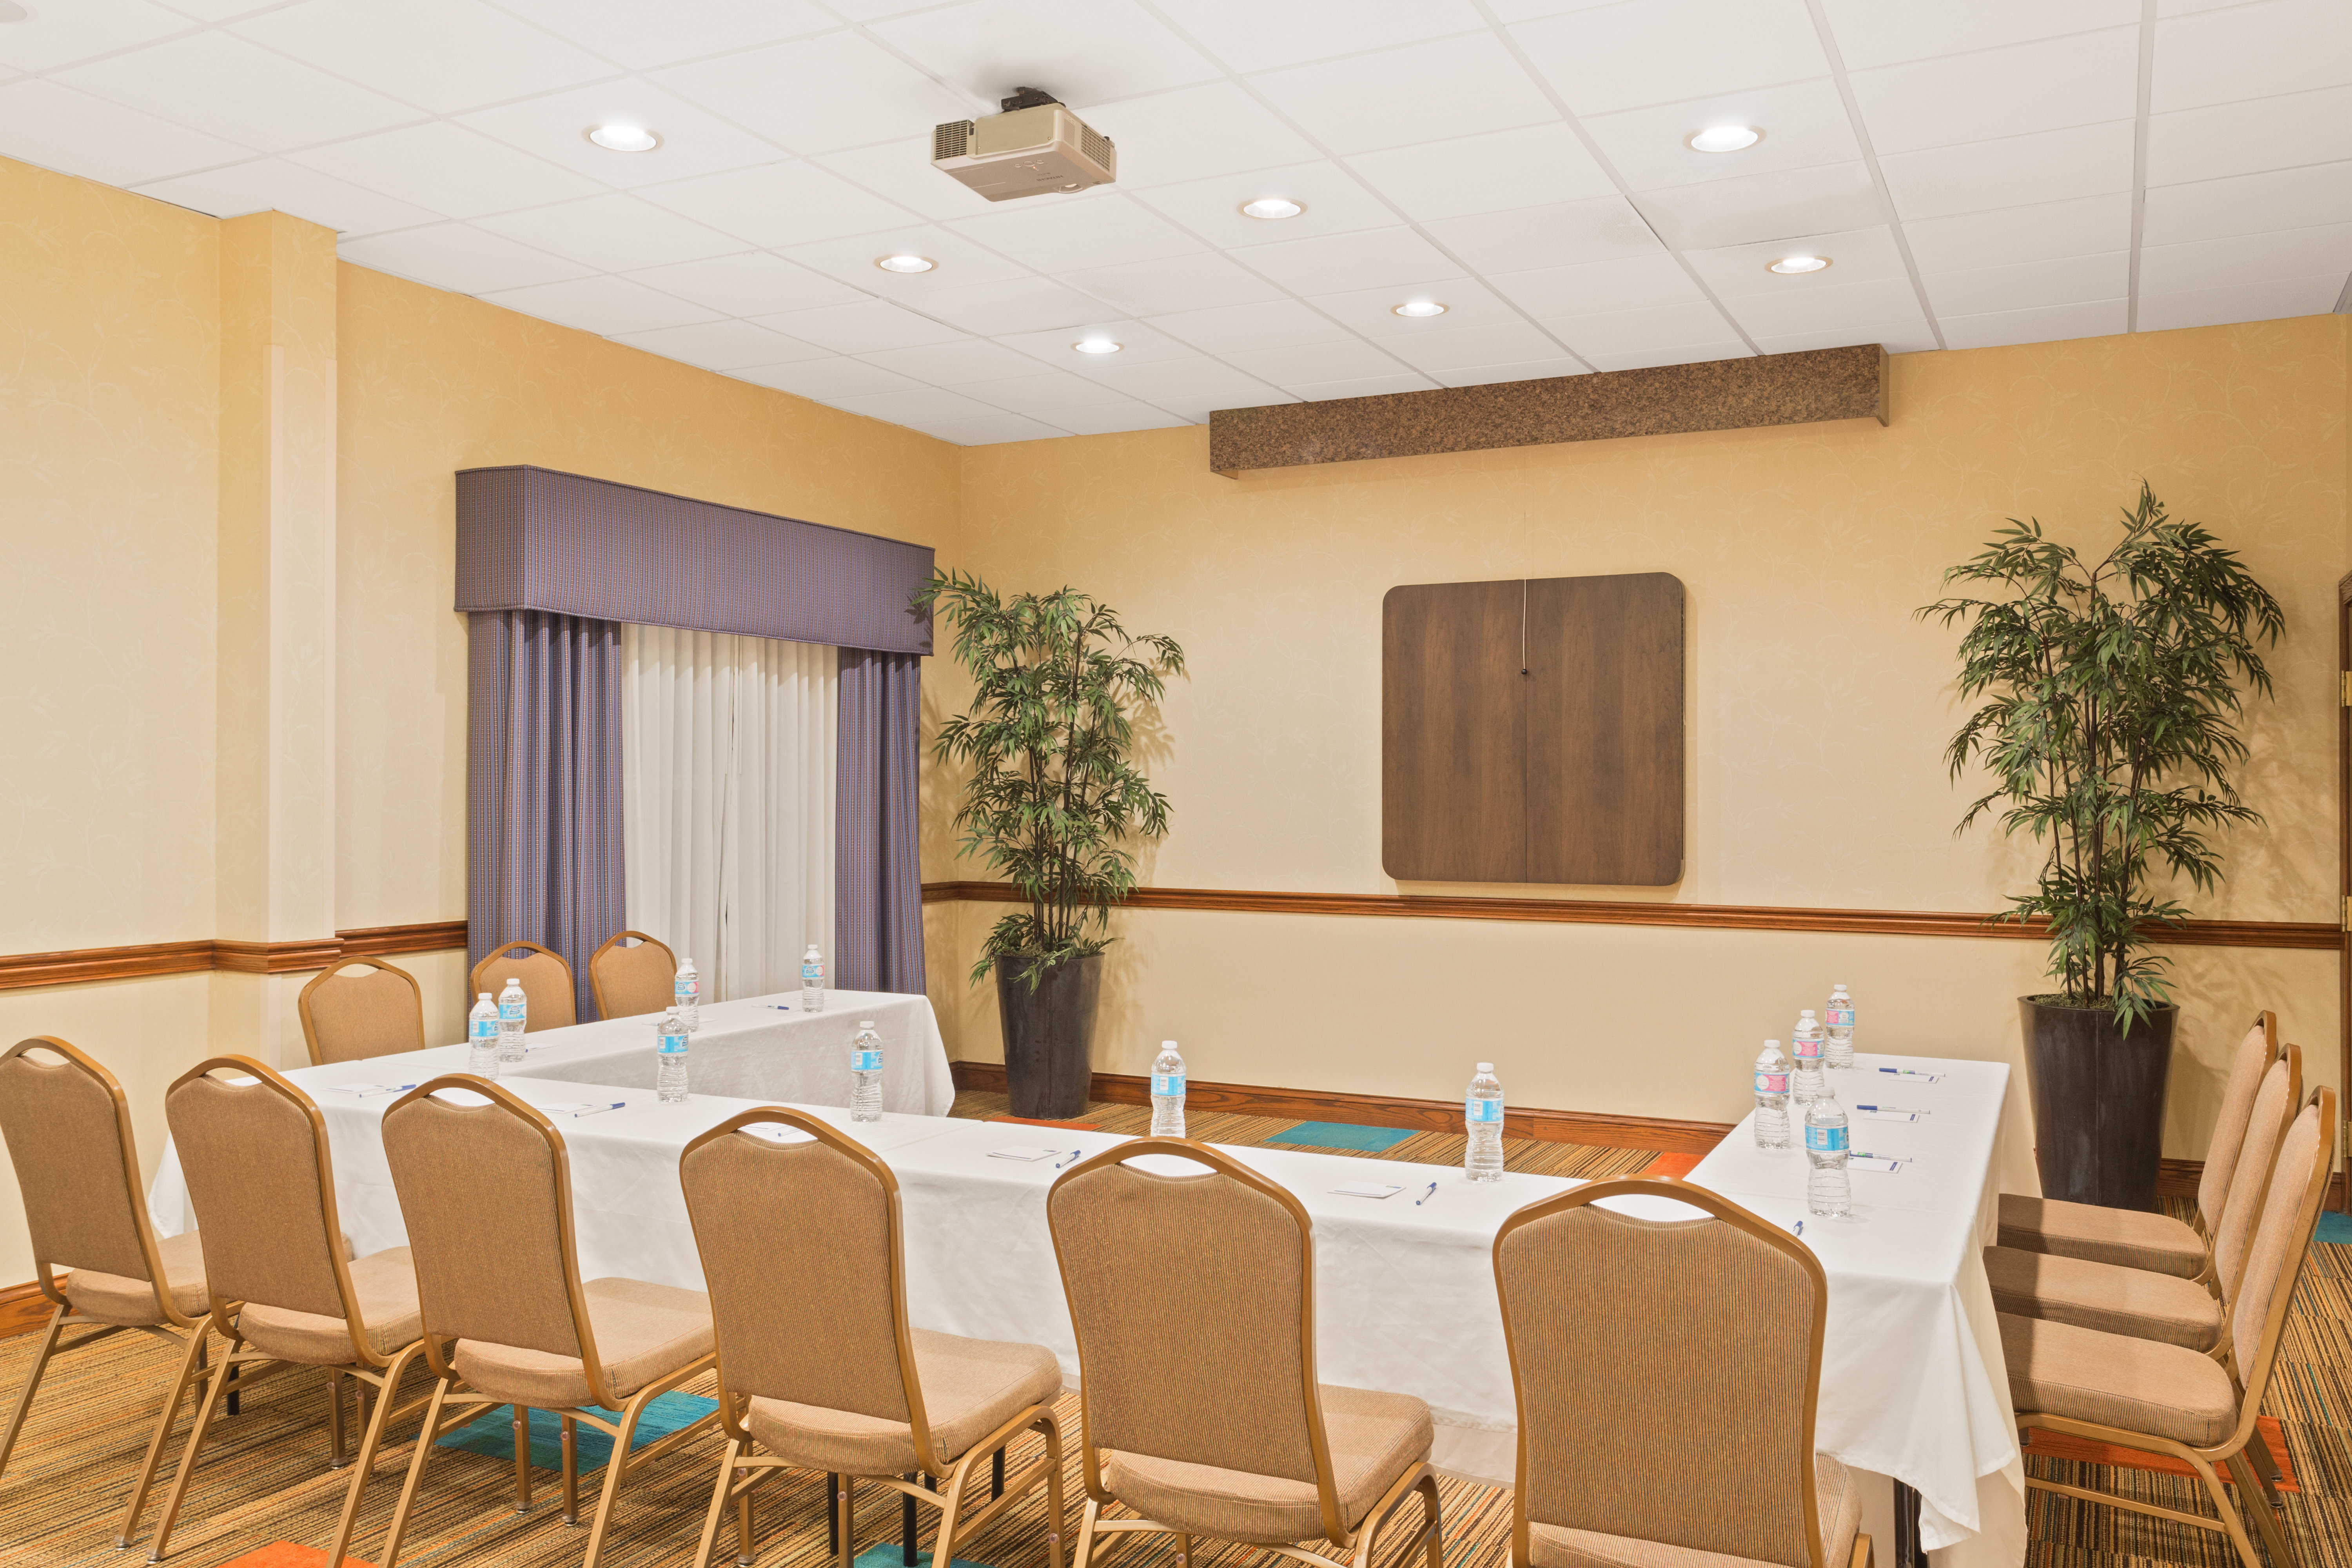 Let us make your meeting a special one!